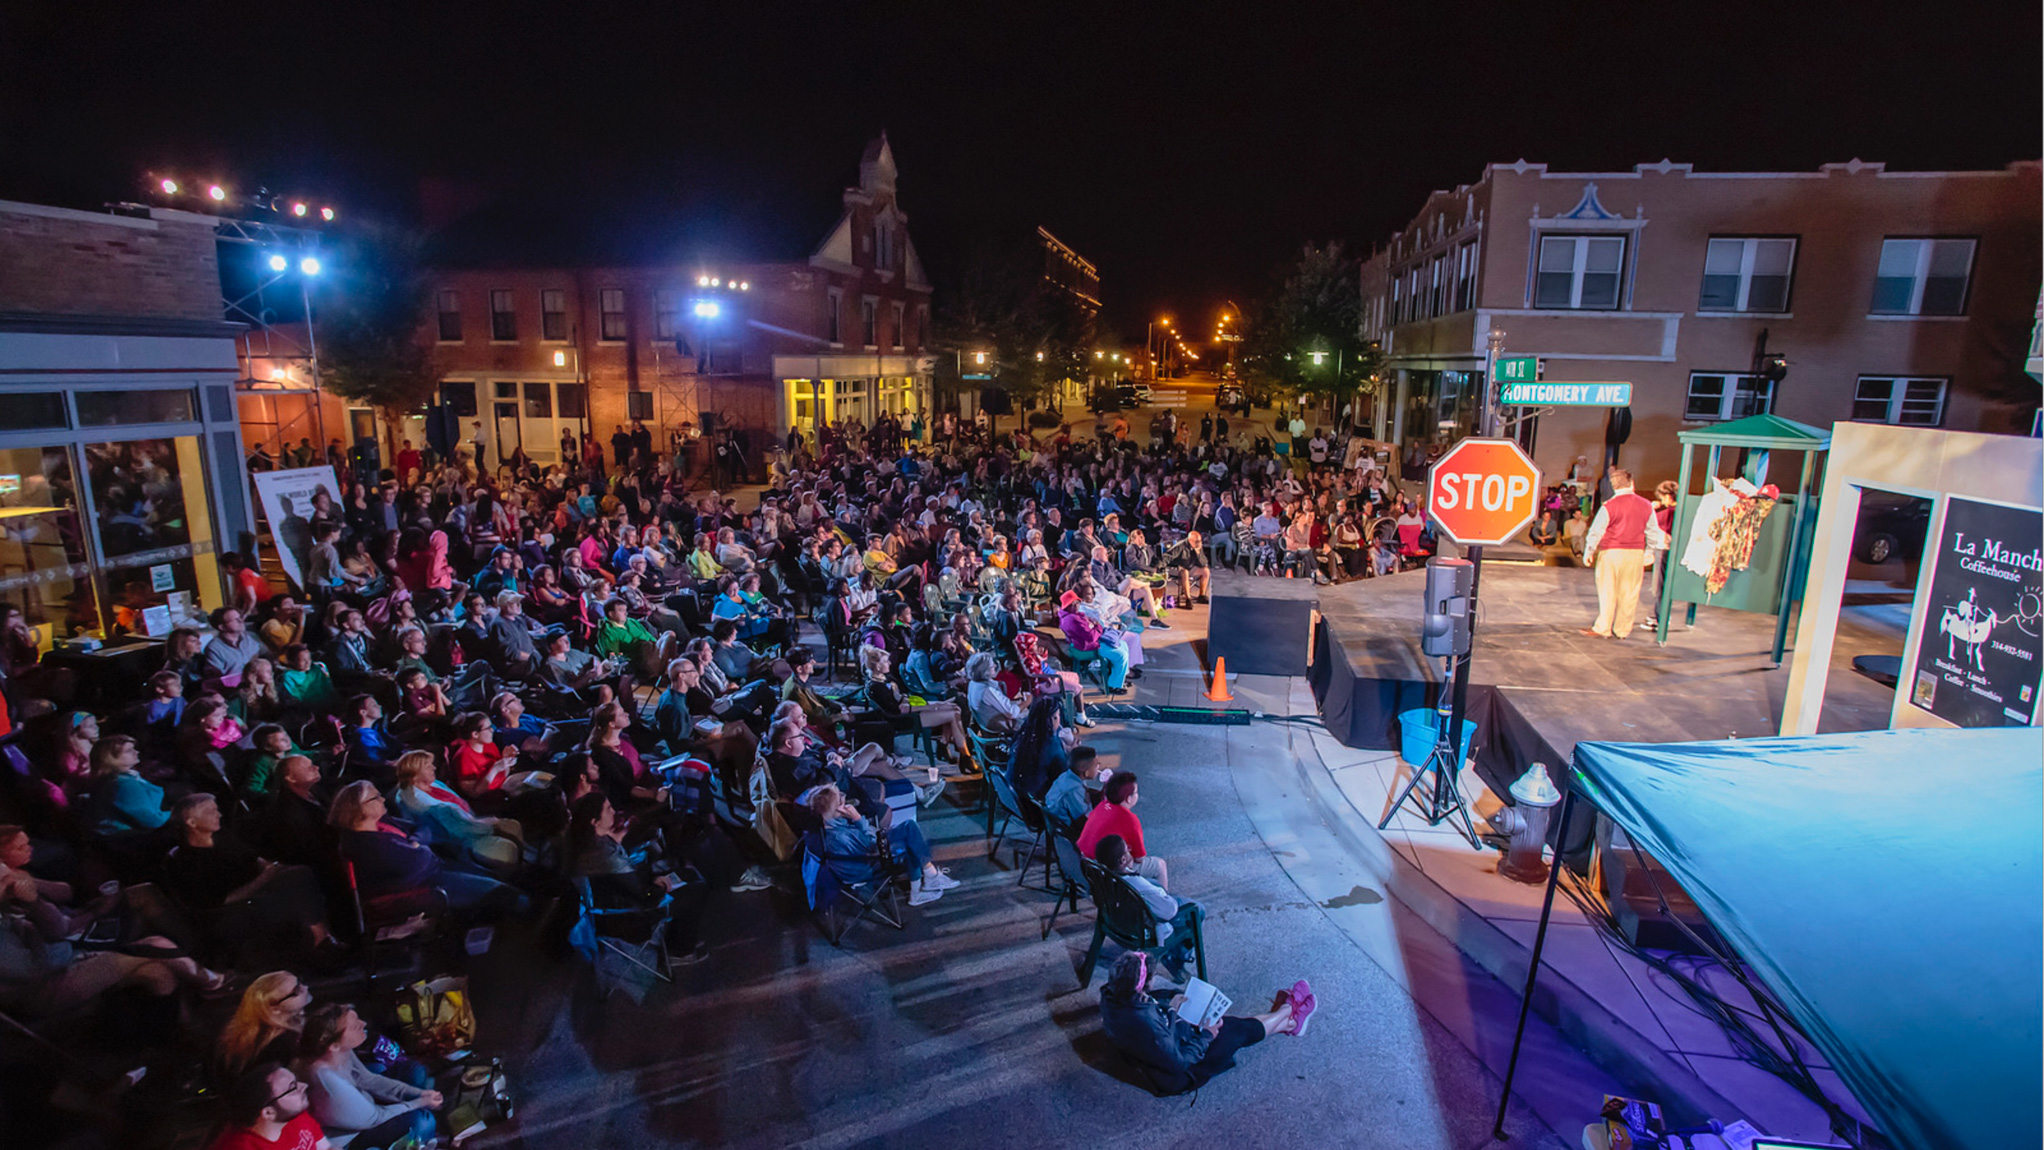 A crowded street watched performers onstage at the Shakespeare Festival St. Louis.